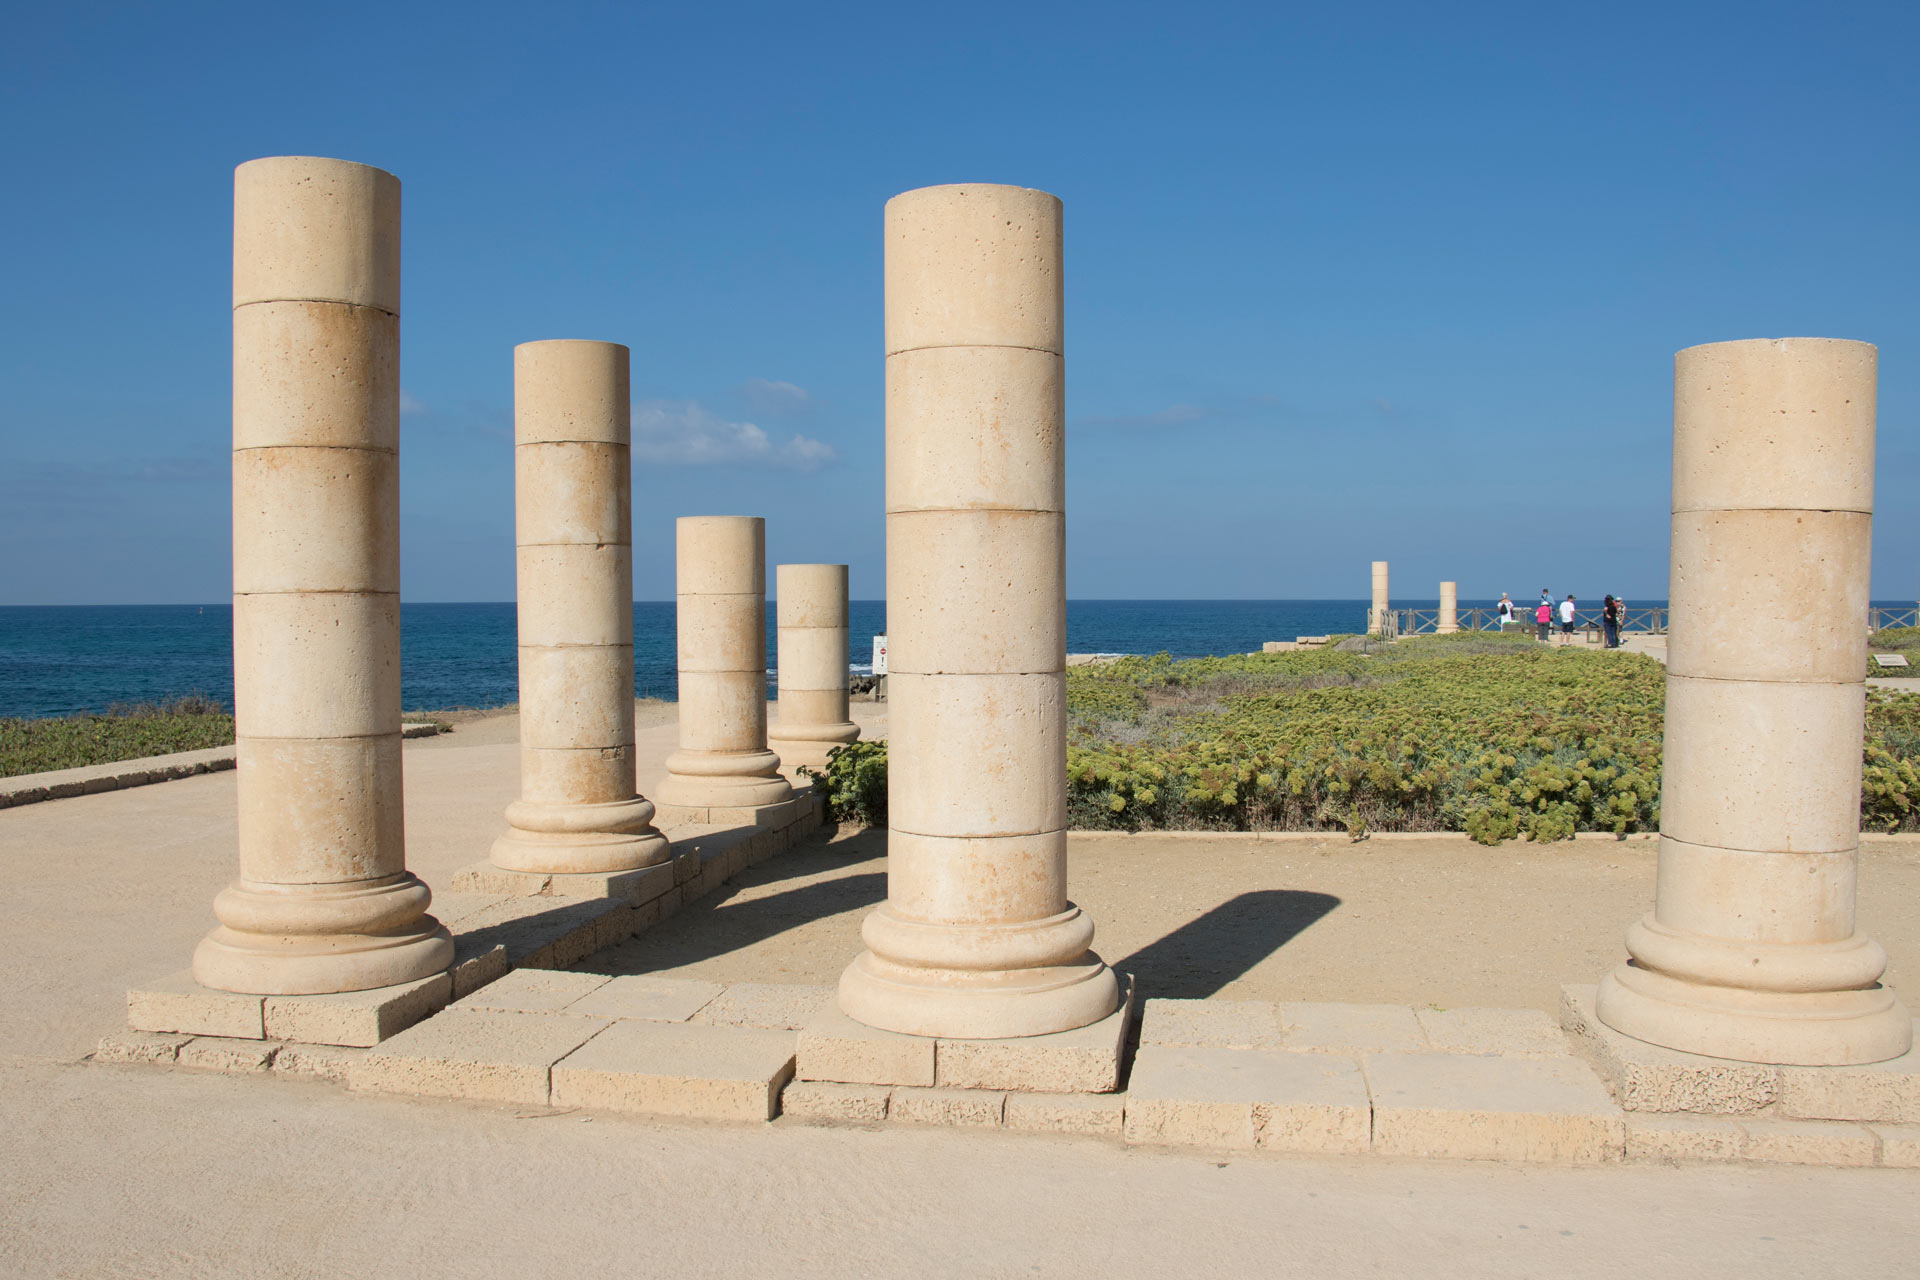 Peristyle Courtyard of the Promontory Palace, Caesarea, Israel